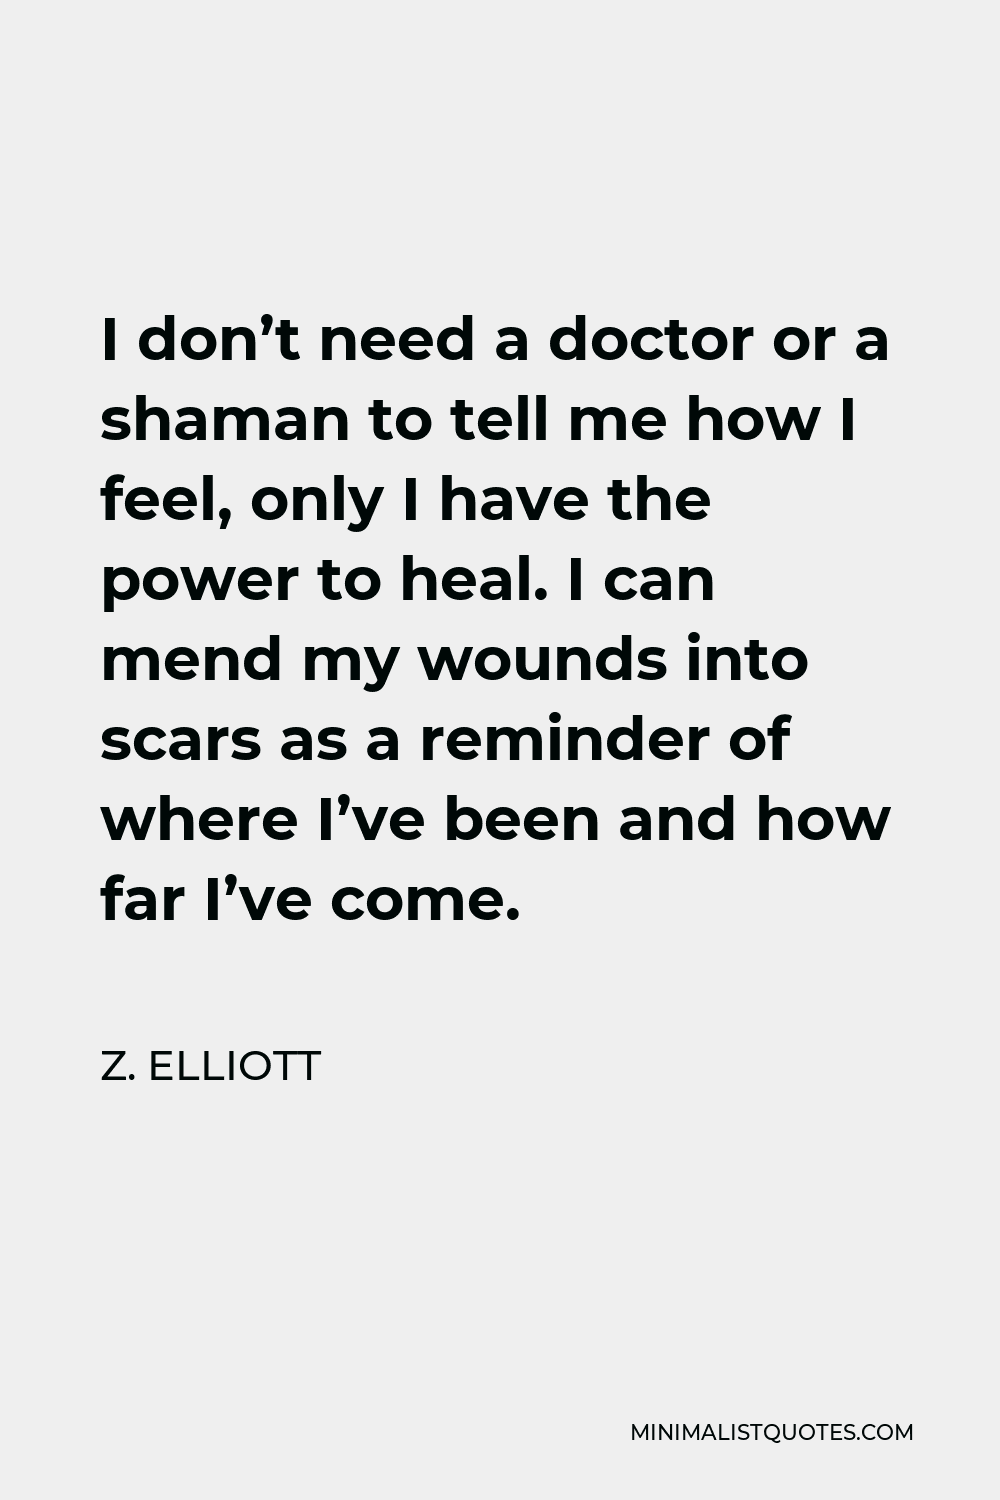 Z. Elliott Quote - I don’t need a doctor or a shaman to tell me how I feel, Only I have the power to heal. I can mend my wounds into scars as a reminder of where I’ve been and how far I’ve come.